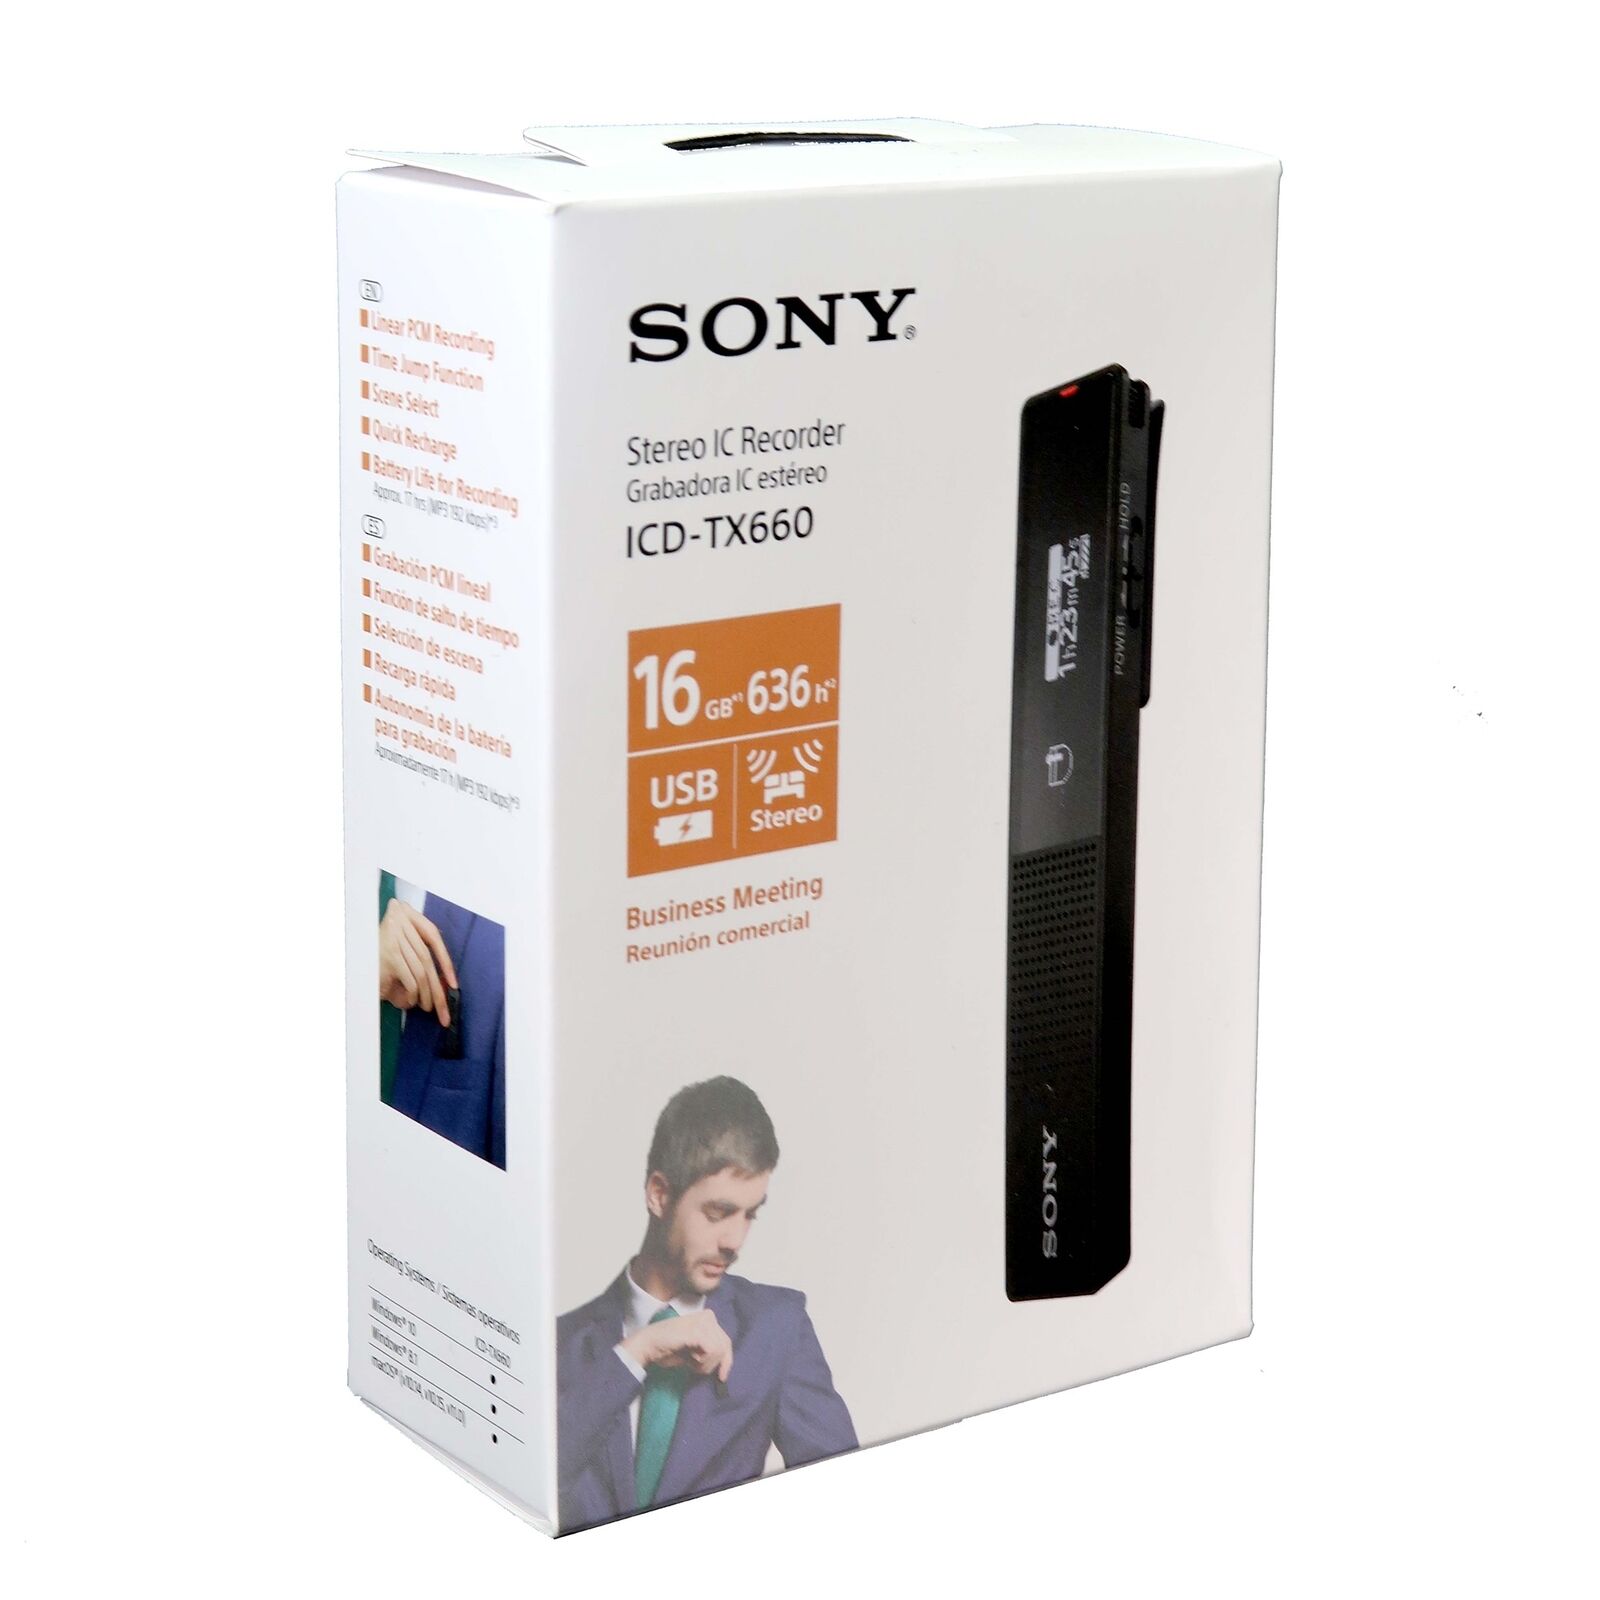 Sony TX660 Digital Stereo IC Voice Recorder 16 GB Built-In Memory